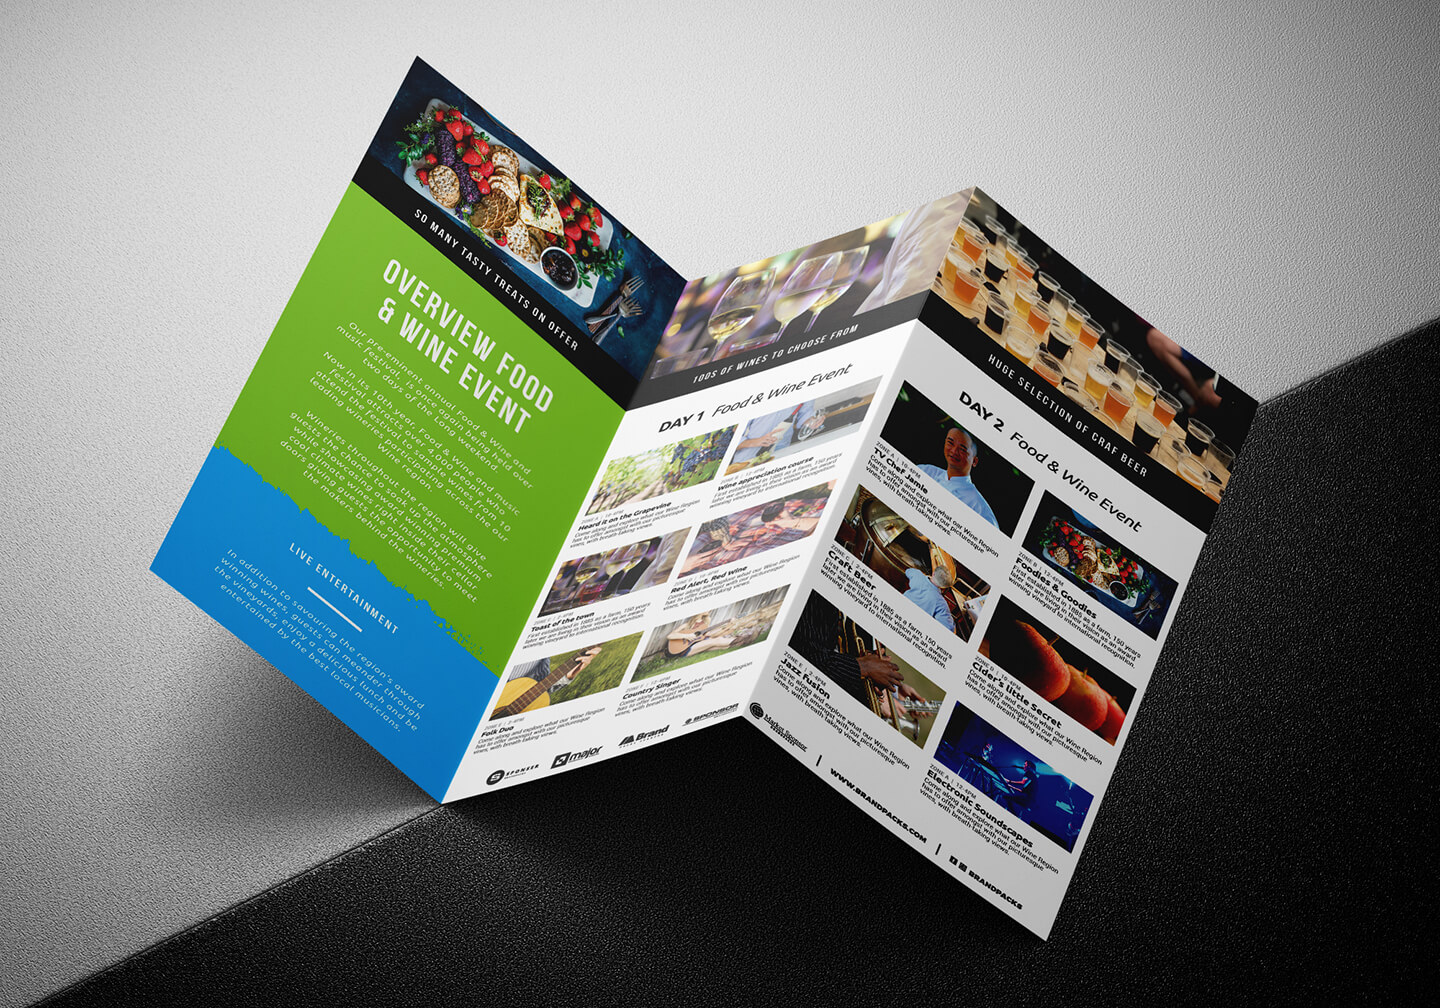 Free Tri Fold Brochure Template For Events & Festivals – Psd Inside Free Three Fold Brochure Template